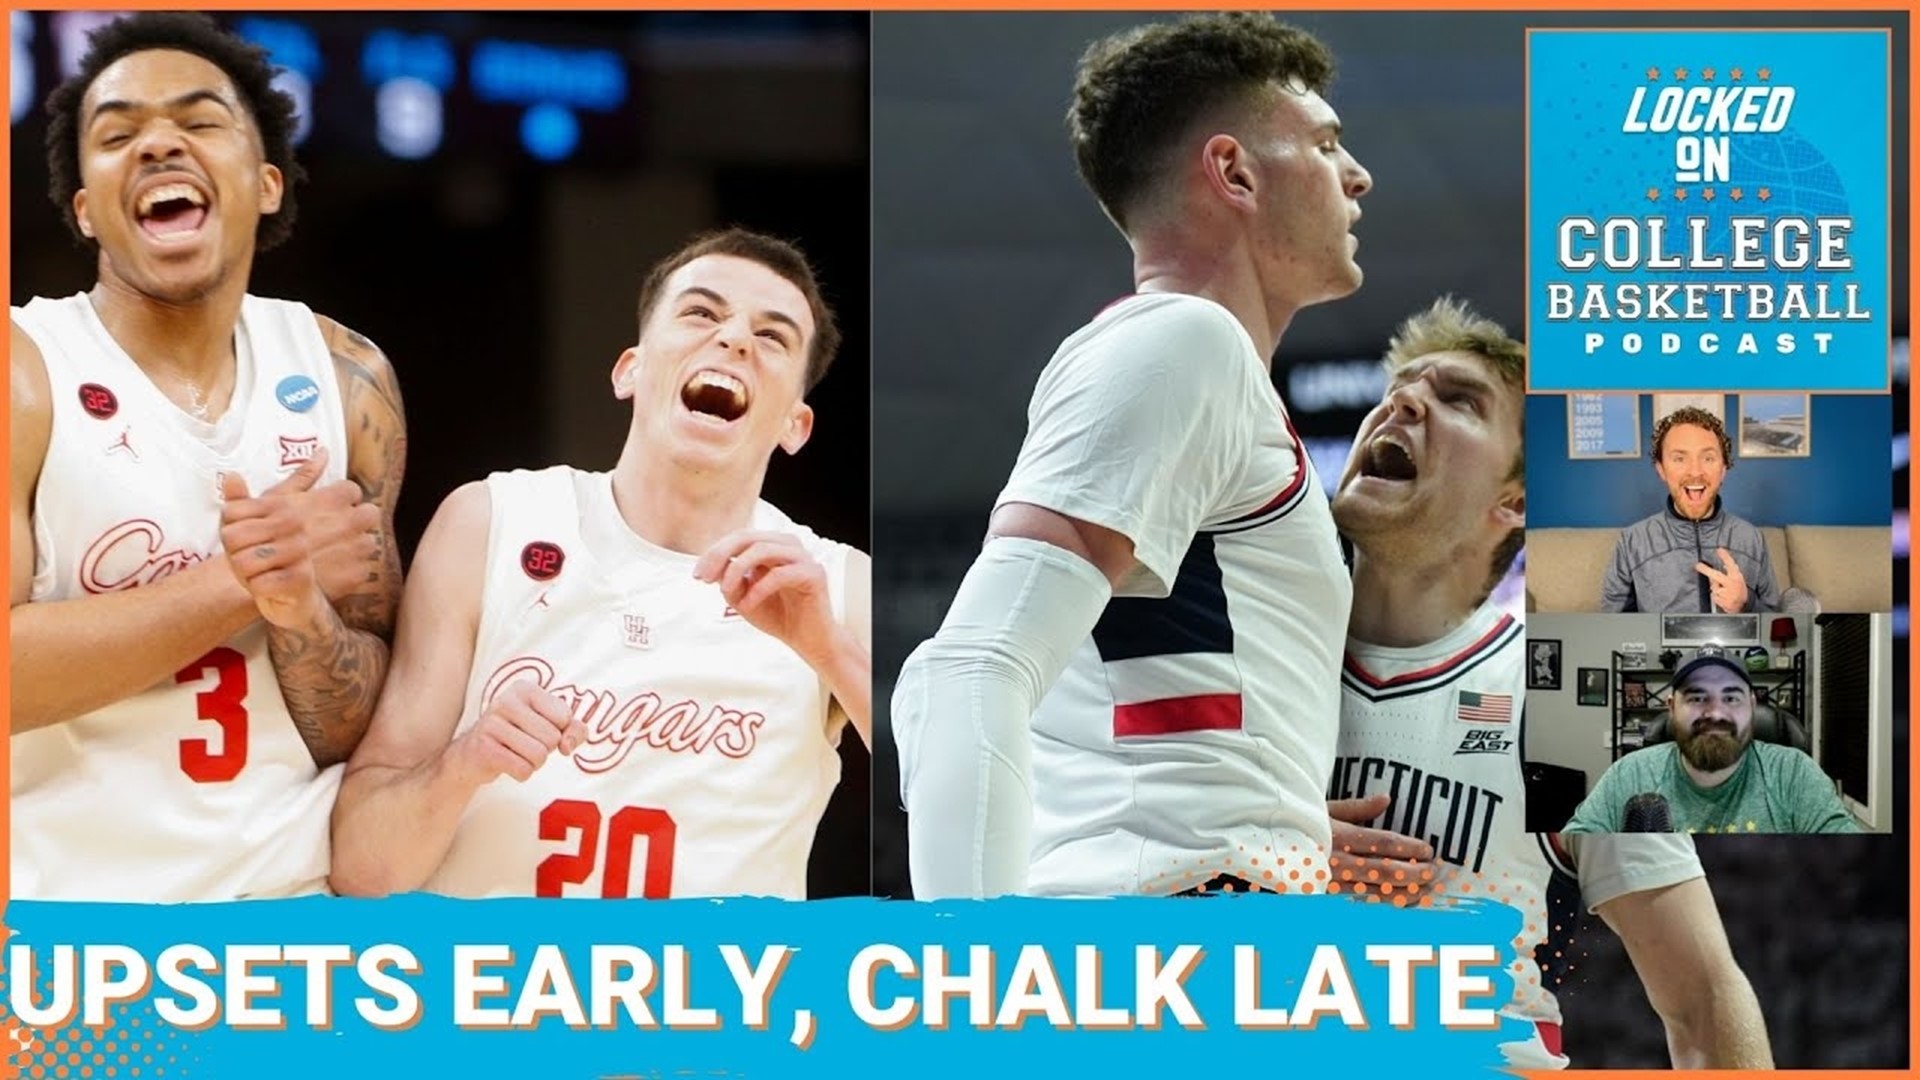 The Sweet 16 of the NCAA Tournament is set. We discuss the chalkiness of the big dance, as well as the strong performance of the ACC.